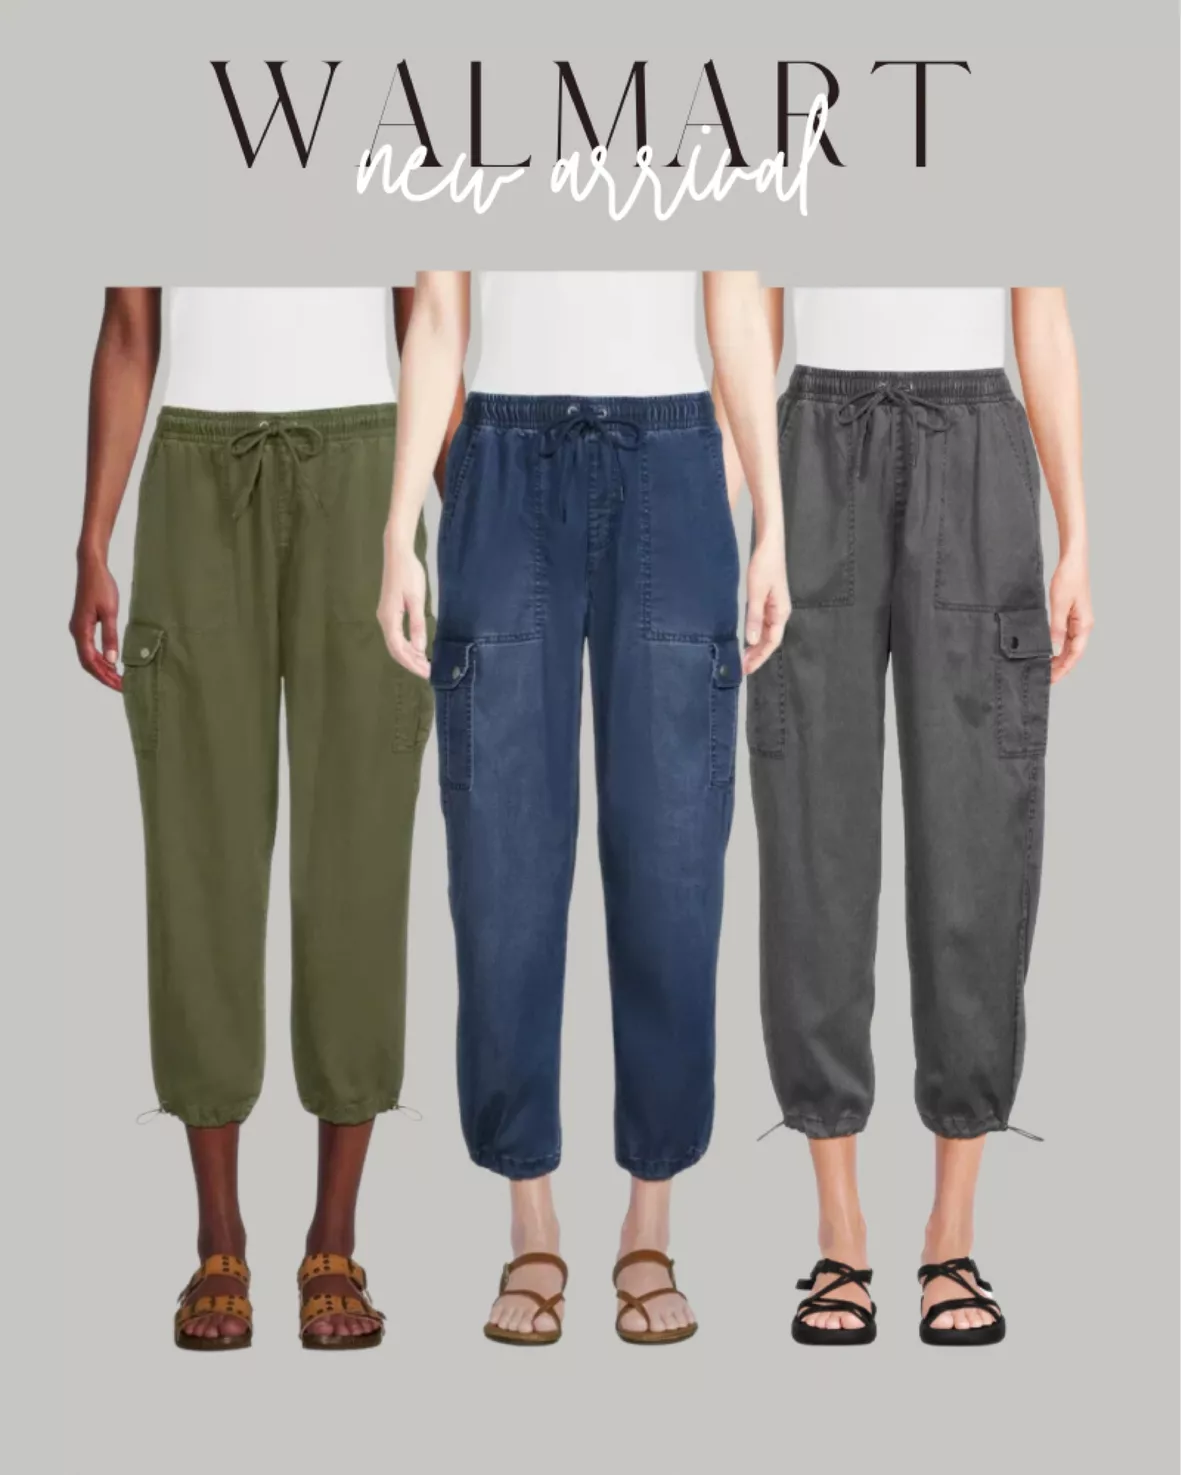 Time and Tru Women's Cargo Pants